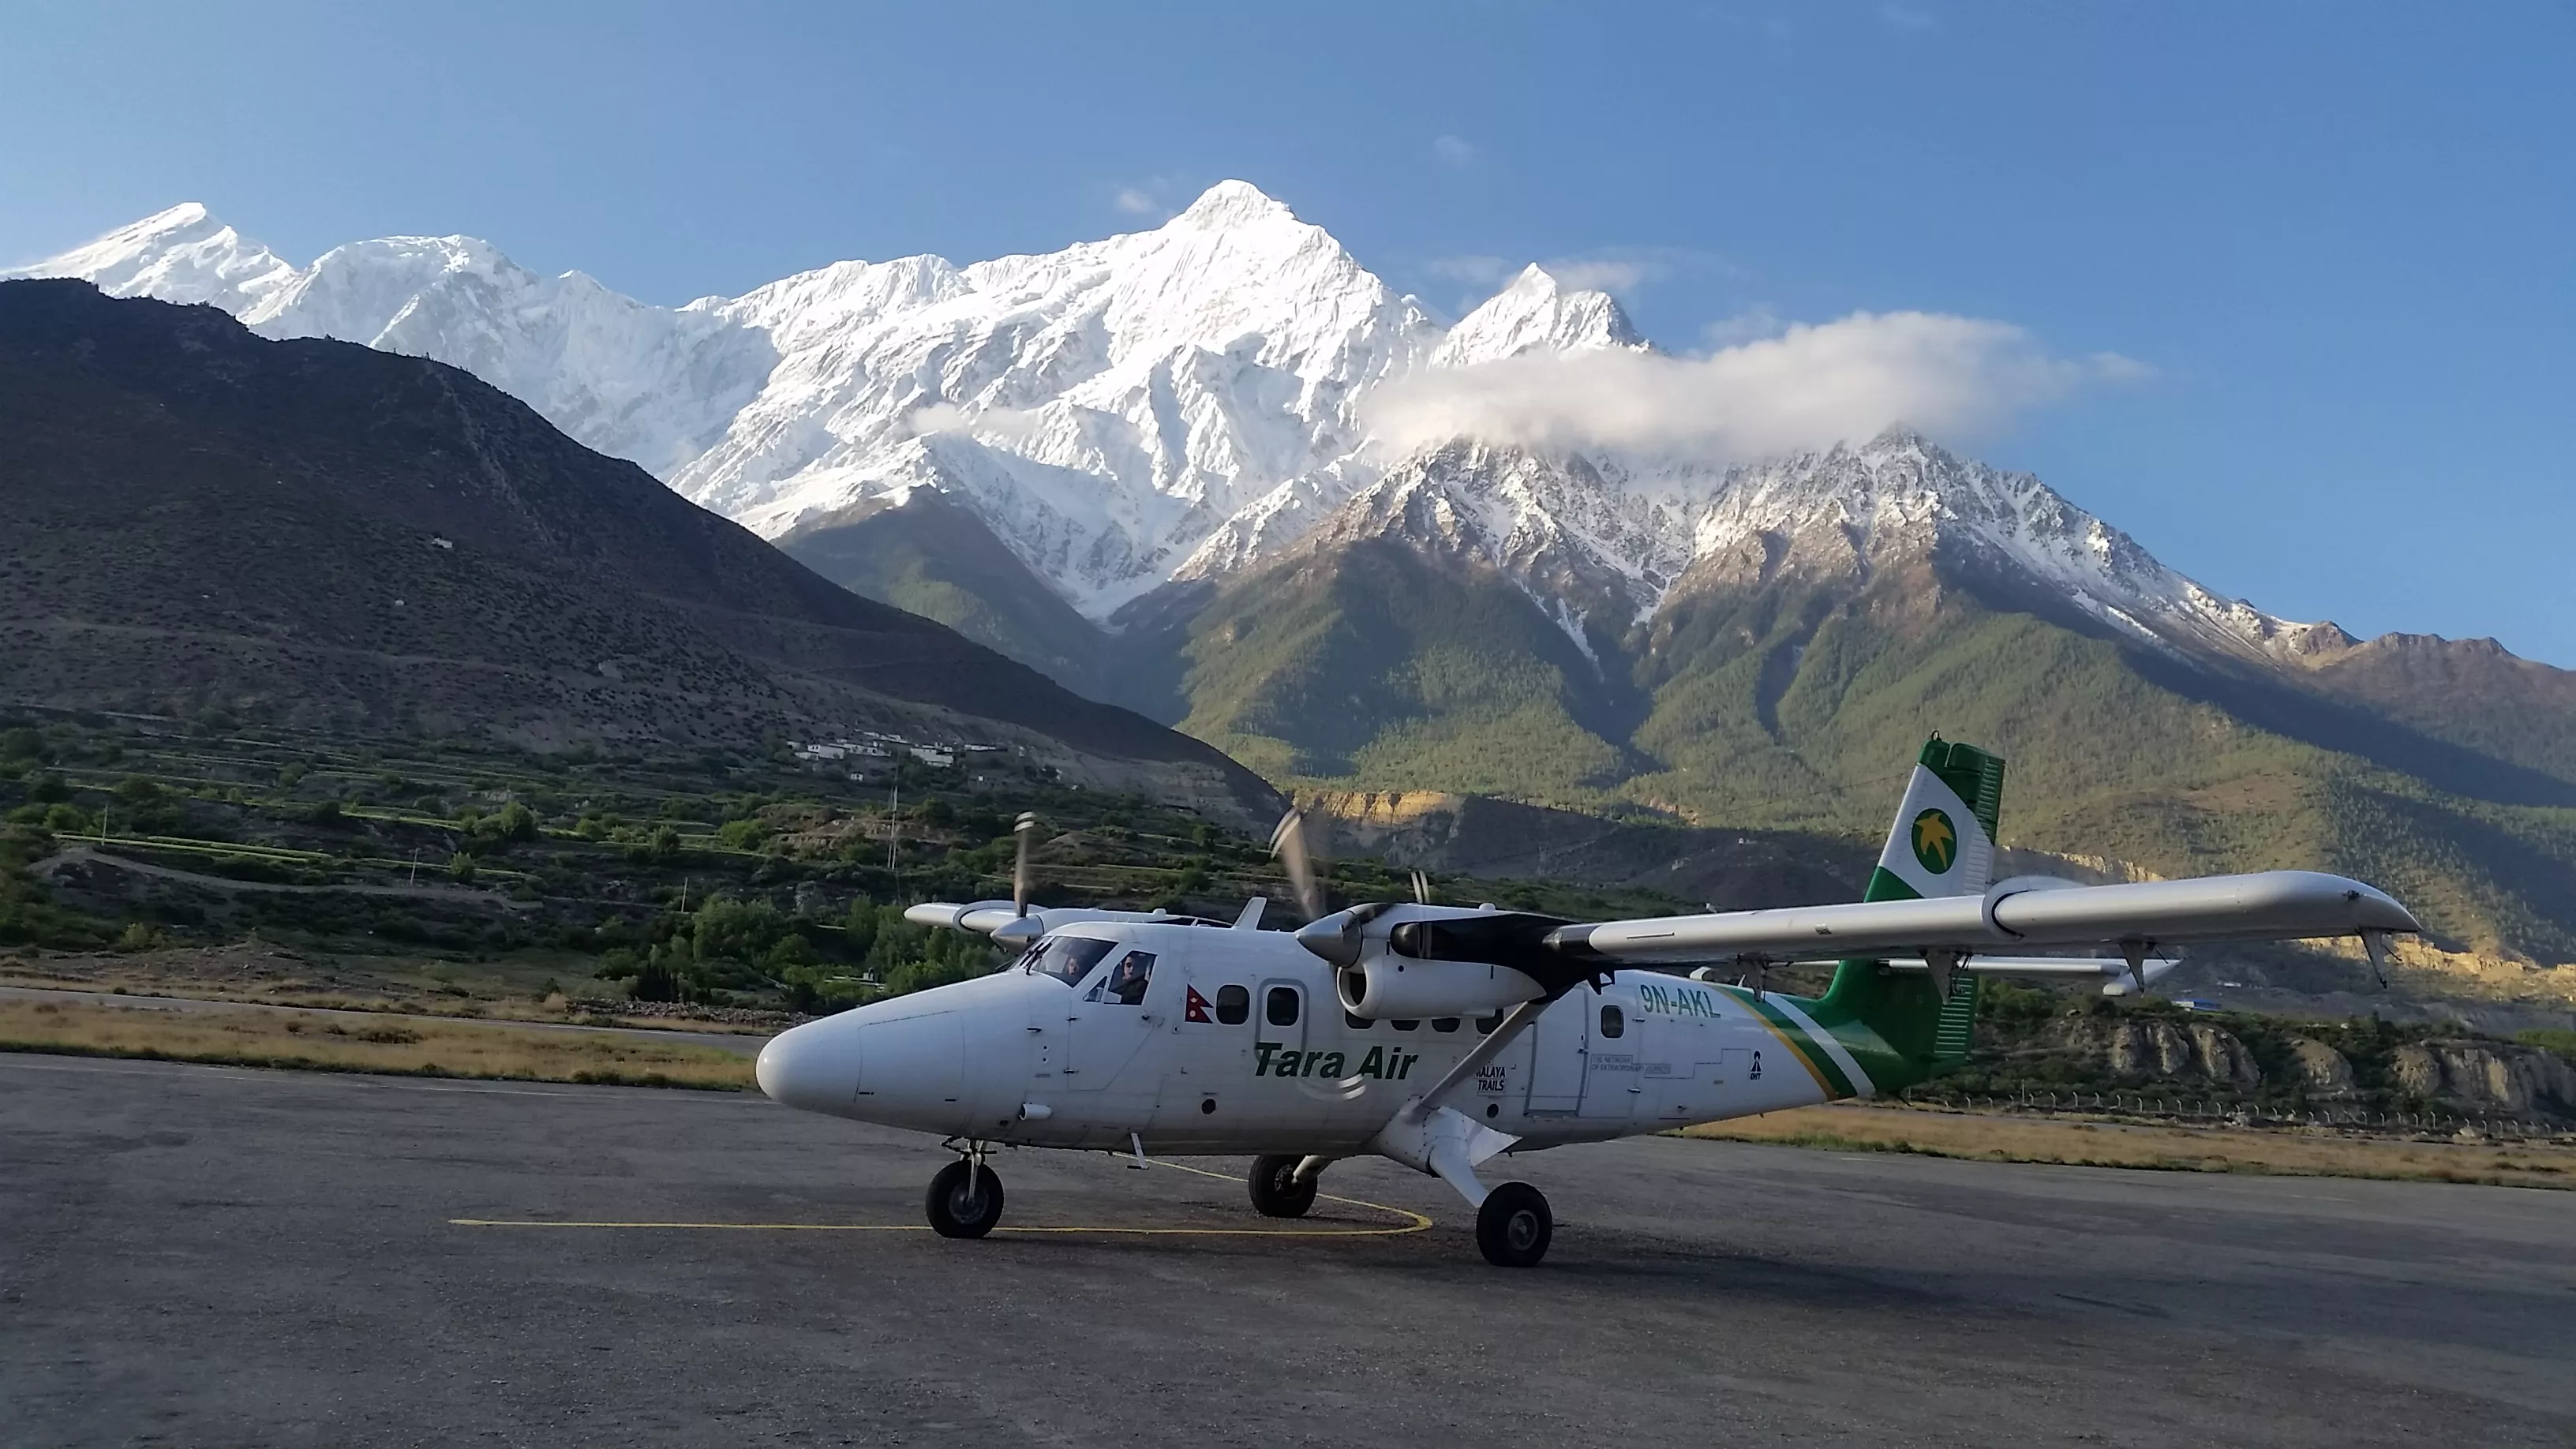 Mount Everest Sightseeing Flight in Nepal, Central Asia | Scenic Flights - Rated 1.2